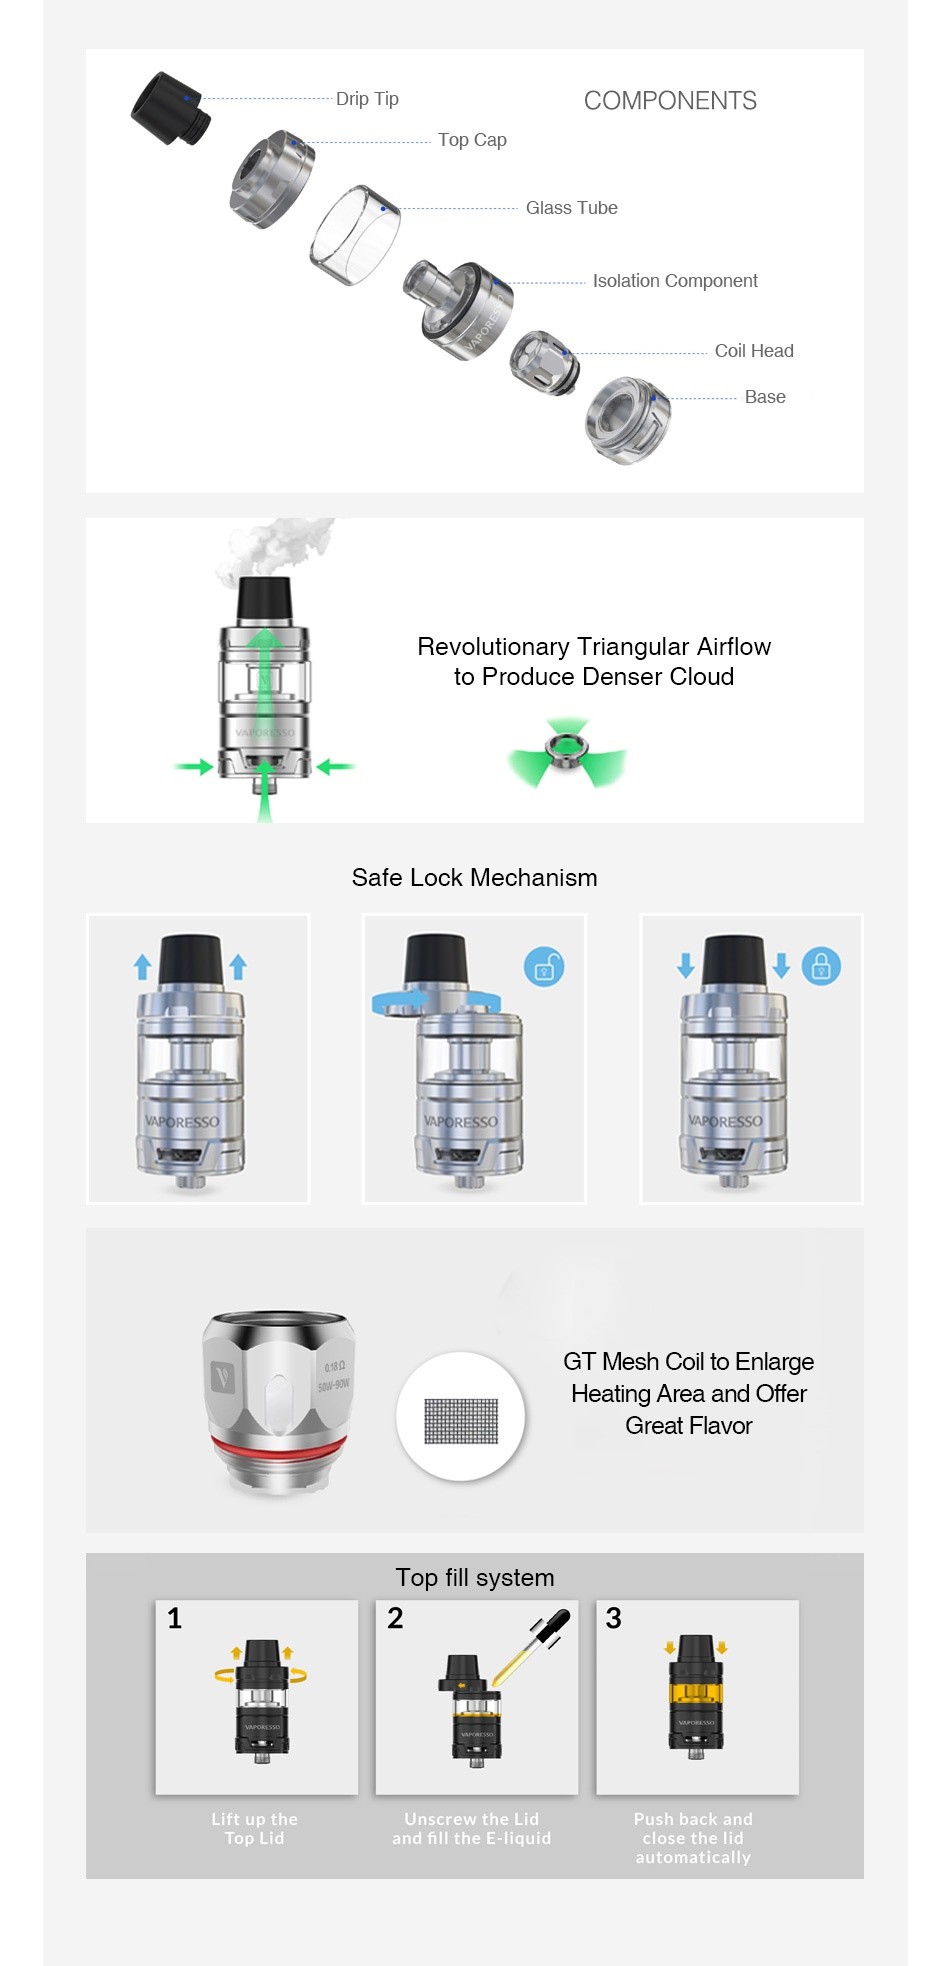 Vaporesso Cascade Baby Subohm Tank 5ml/2ml Drip I ip COMPONENTS Tube Isolation Component Coil Head Revolutionary Triangular Airflow to produce denser cloud Safe lock Mechanism GT Mesh Coil to Enlarge 90 Heating Area and Ofer Great flavor Top fill system Lift up the Unscrew the Lid Push back and Top Lid and fill the E liquid automatically